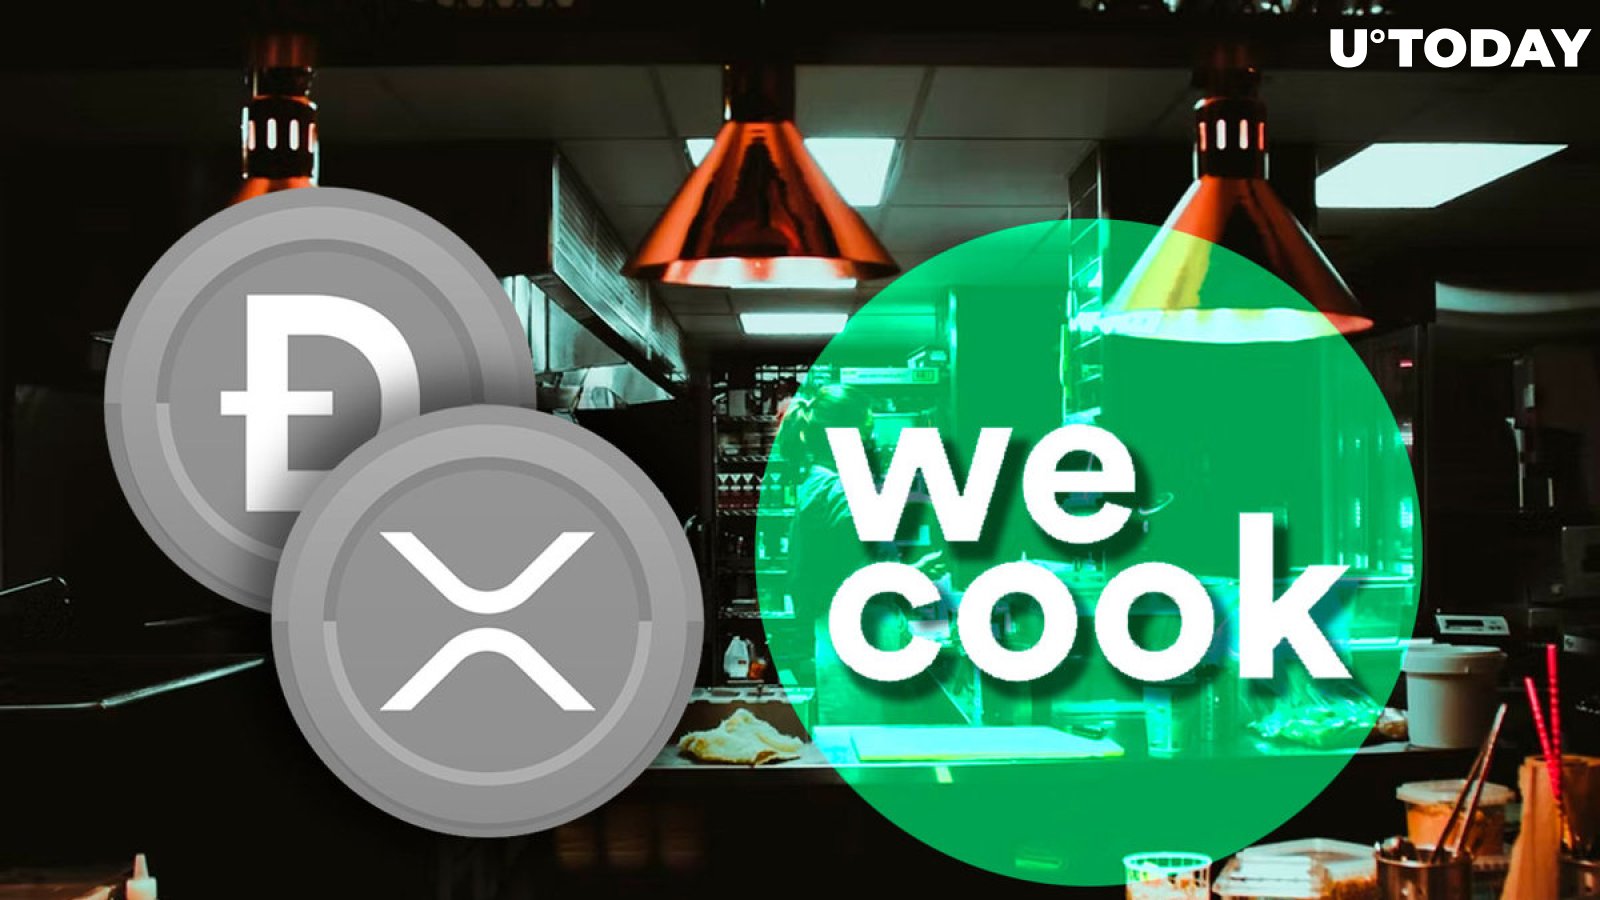 Dogecoin, XRP Can Now Be Accepted as Payment by Canadian Food Tech, WeCook